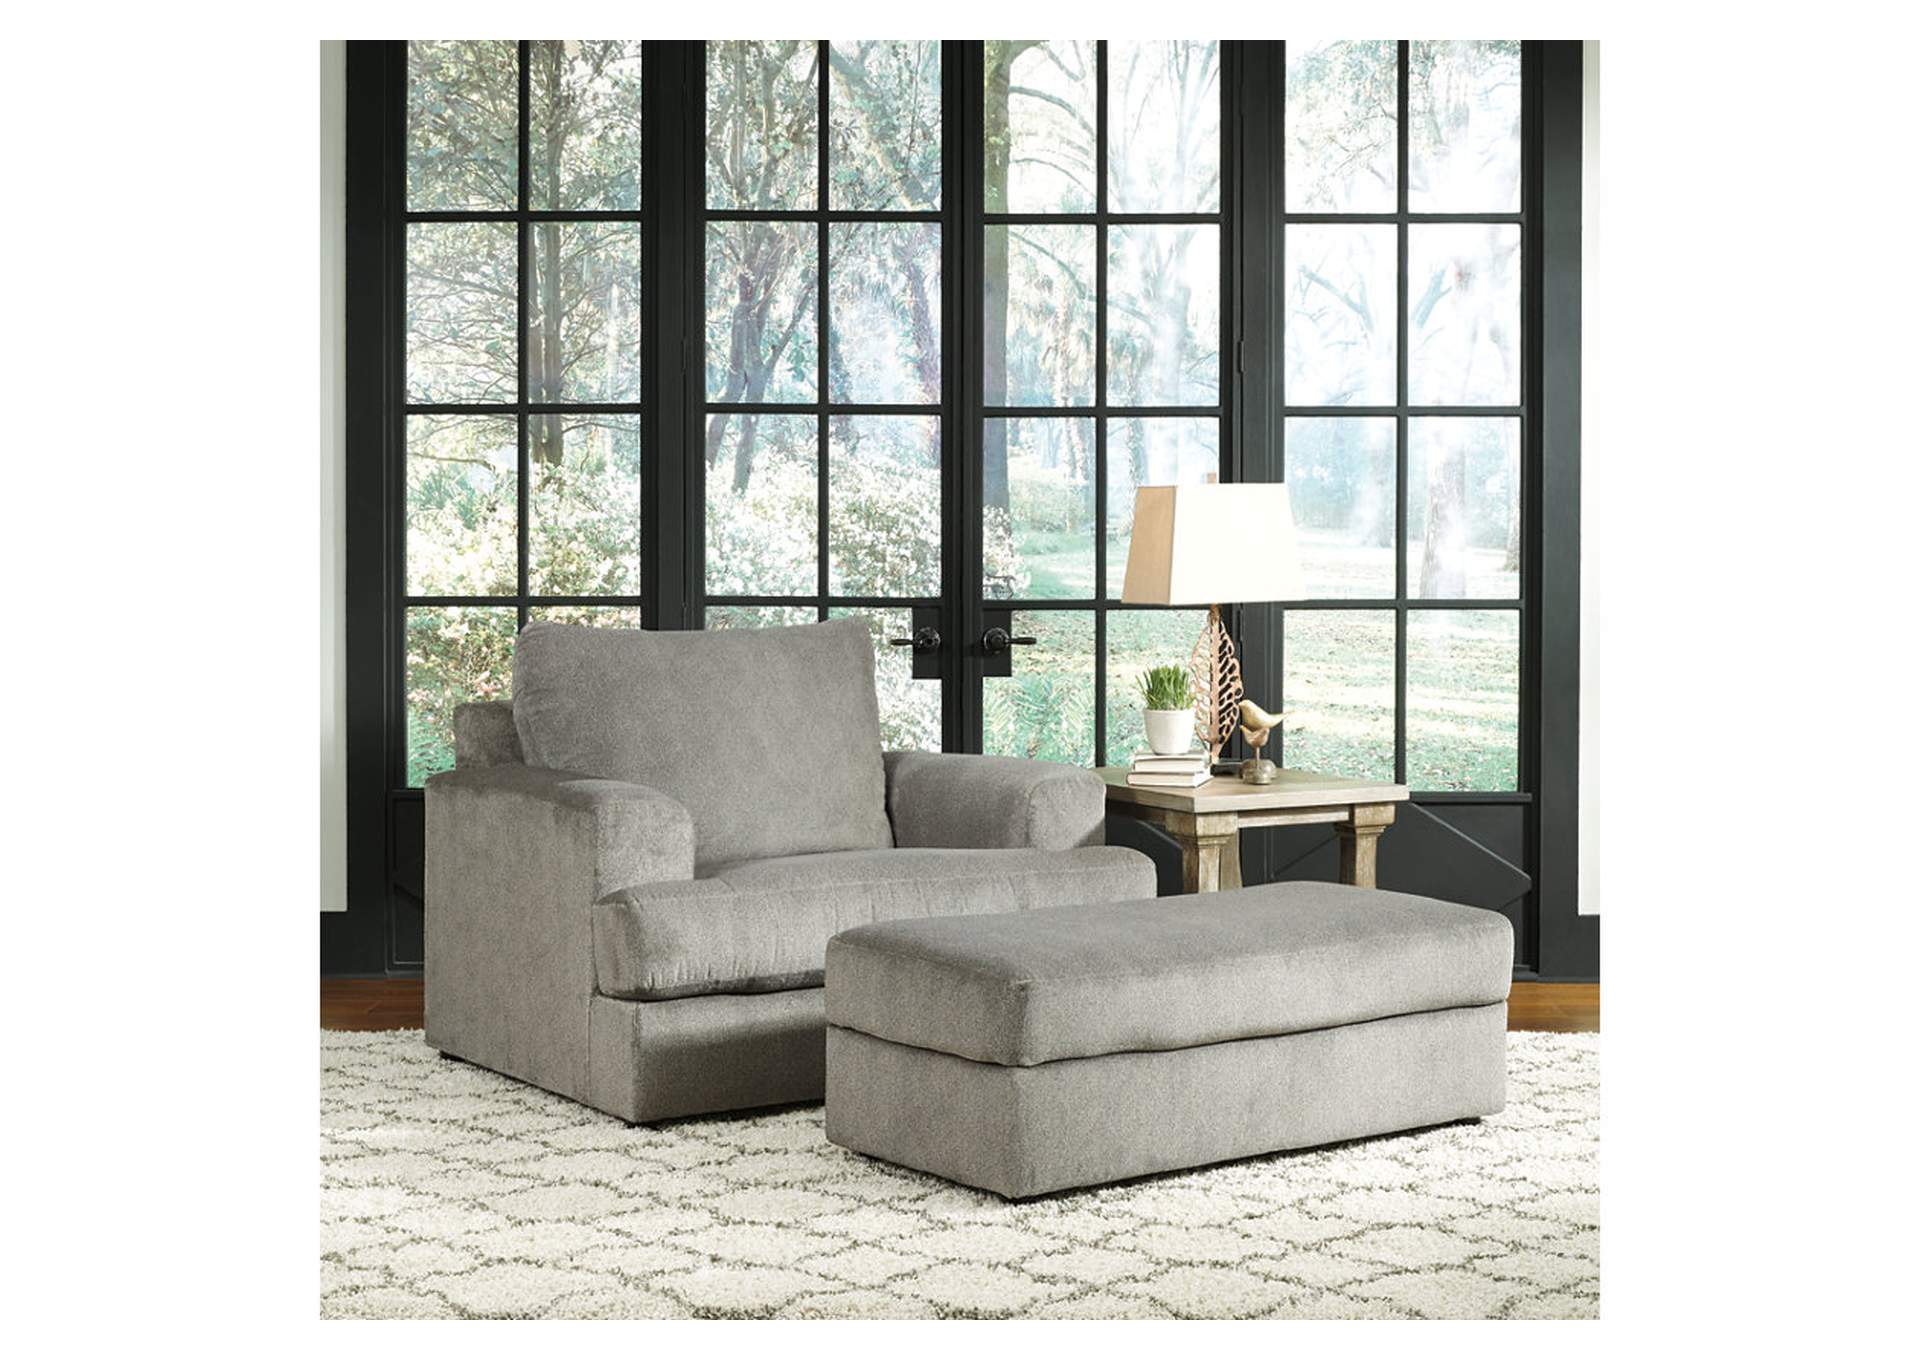 Soletren Sofa, Loveseat, Chair and Ottoman,Signature Design By Ashley